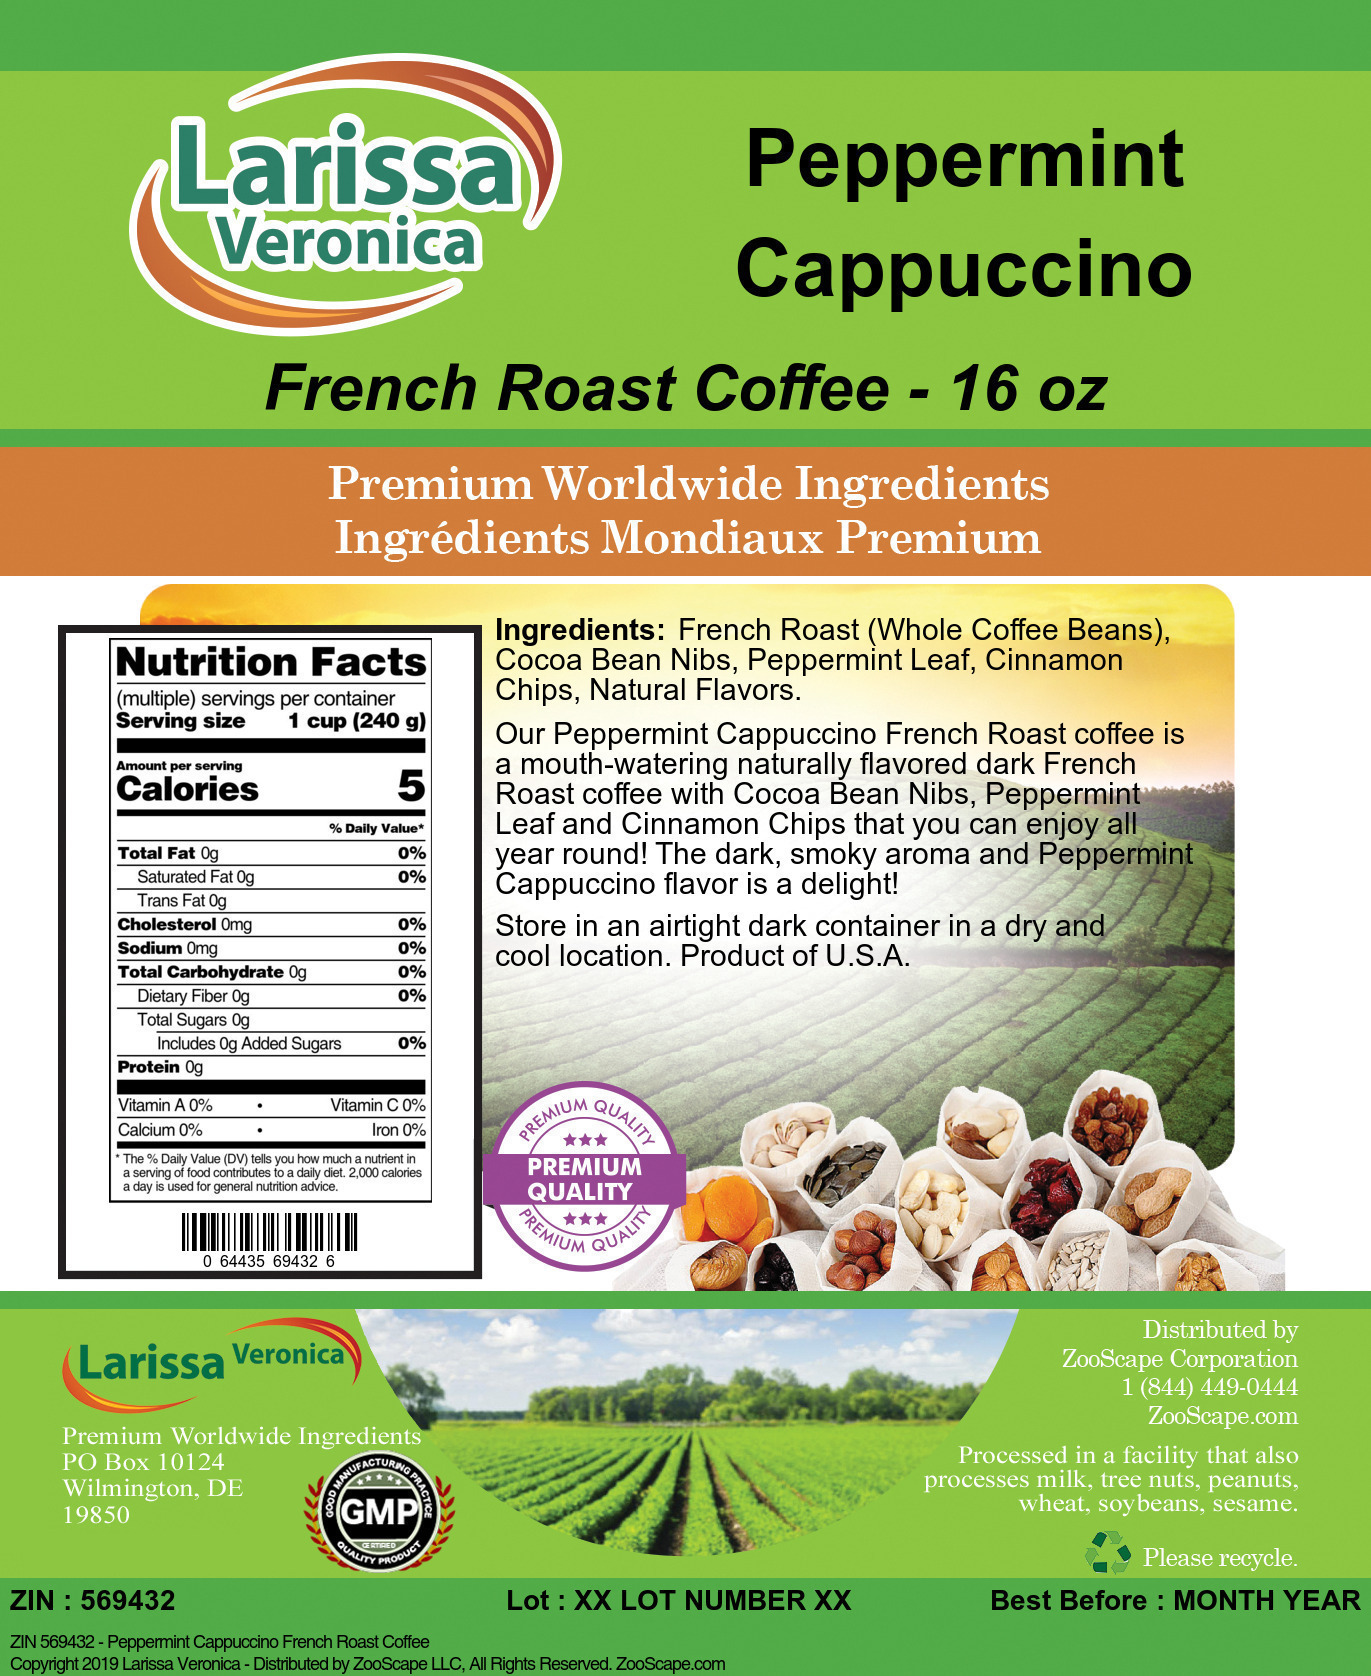 Peppermint Cappuccino French Roast Coffee - Label